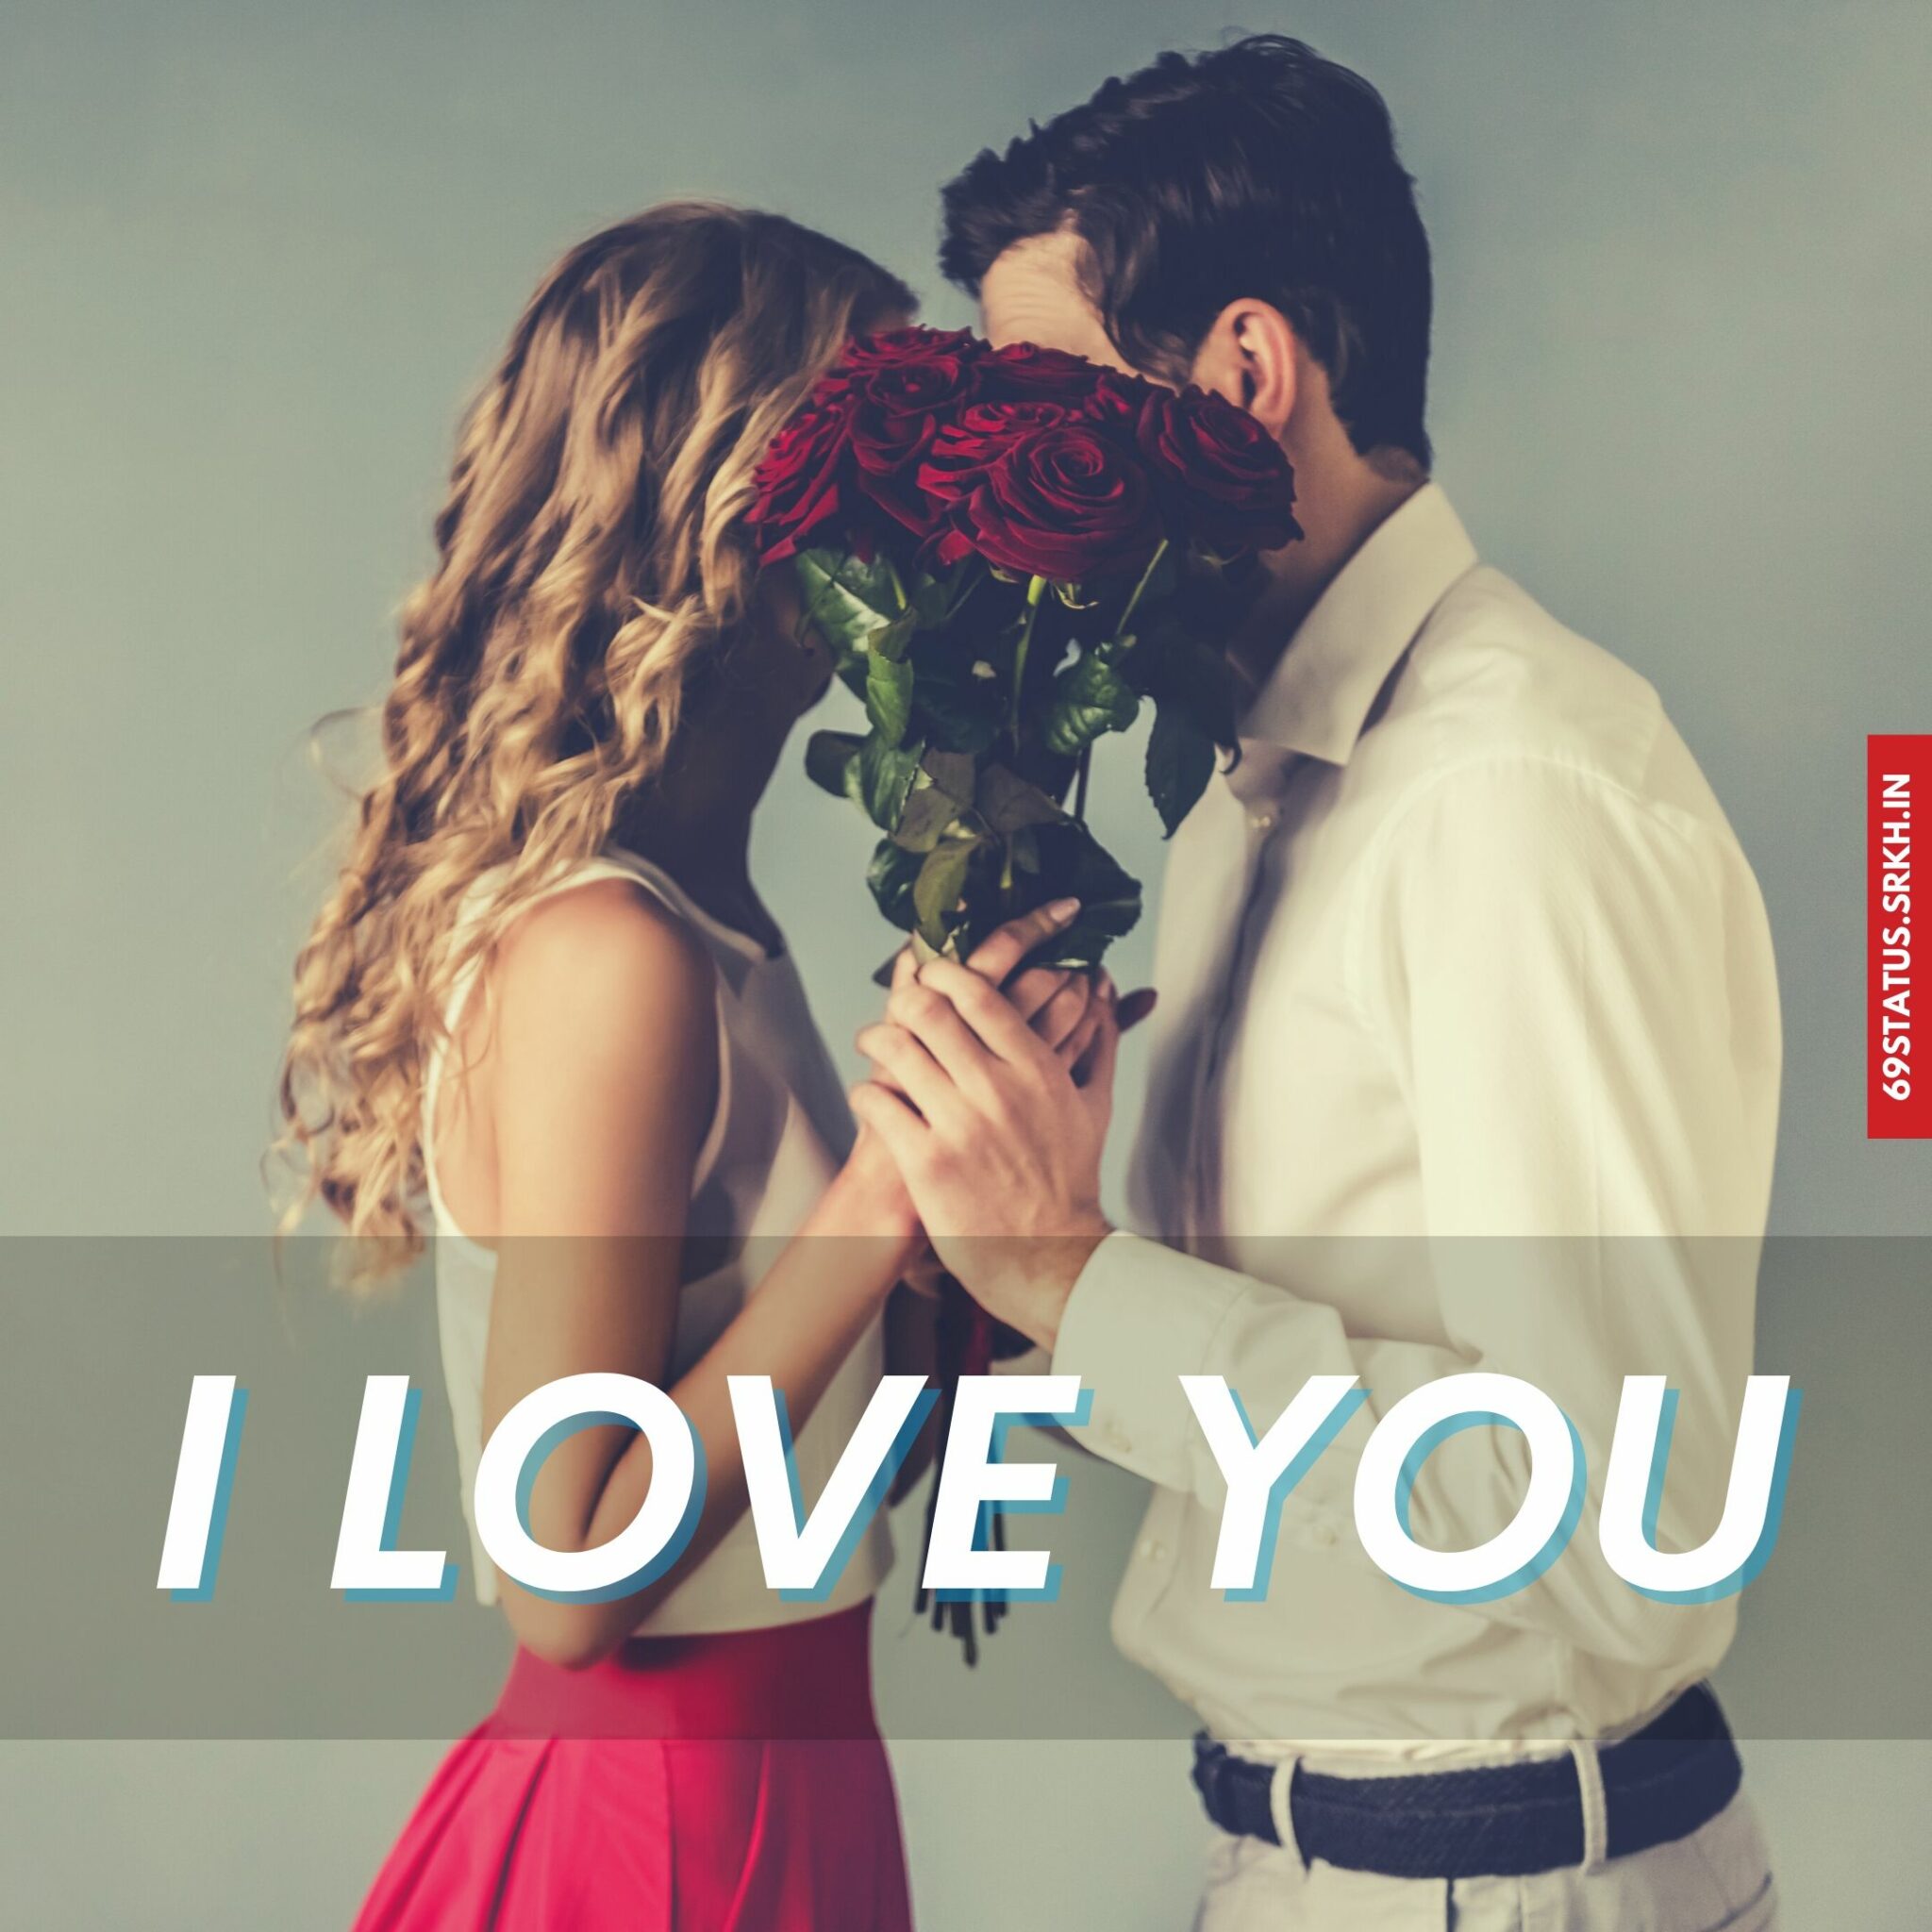 I Love You couple images